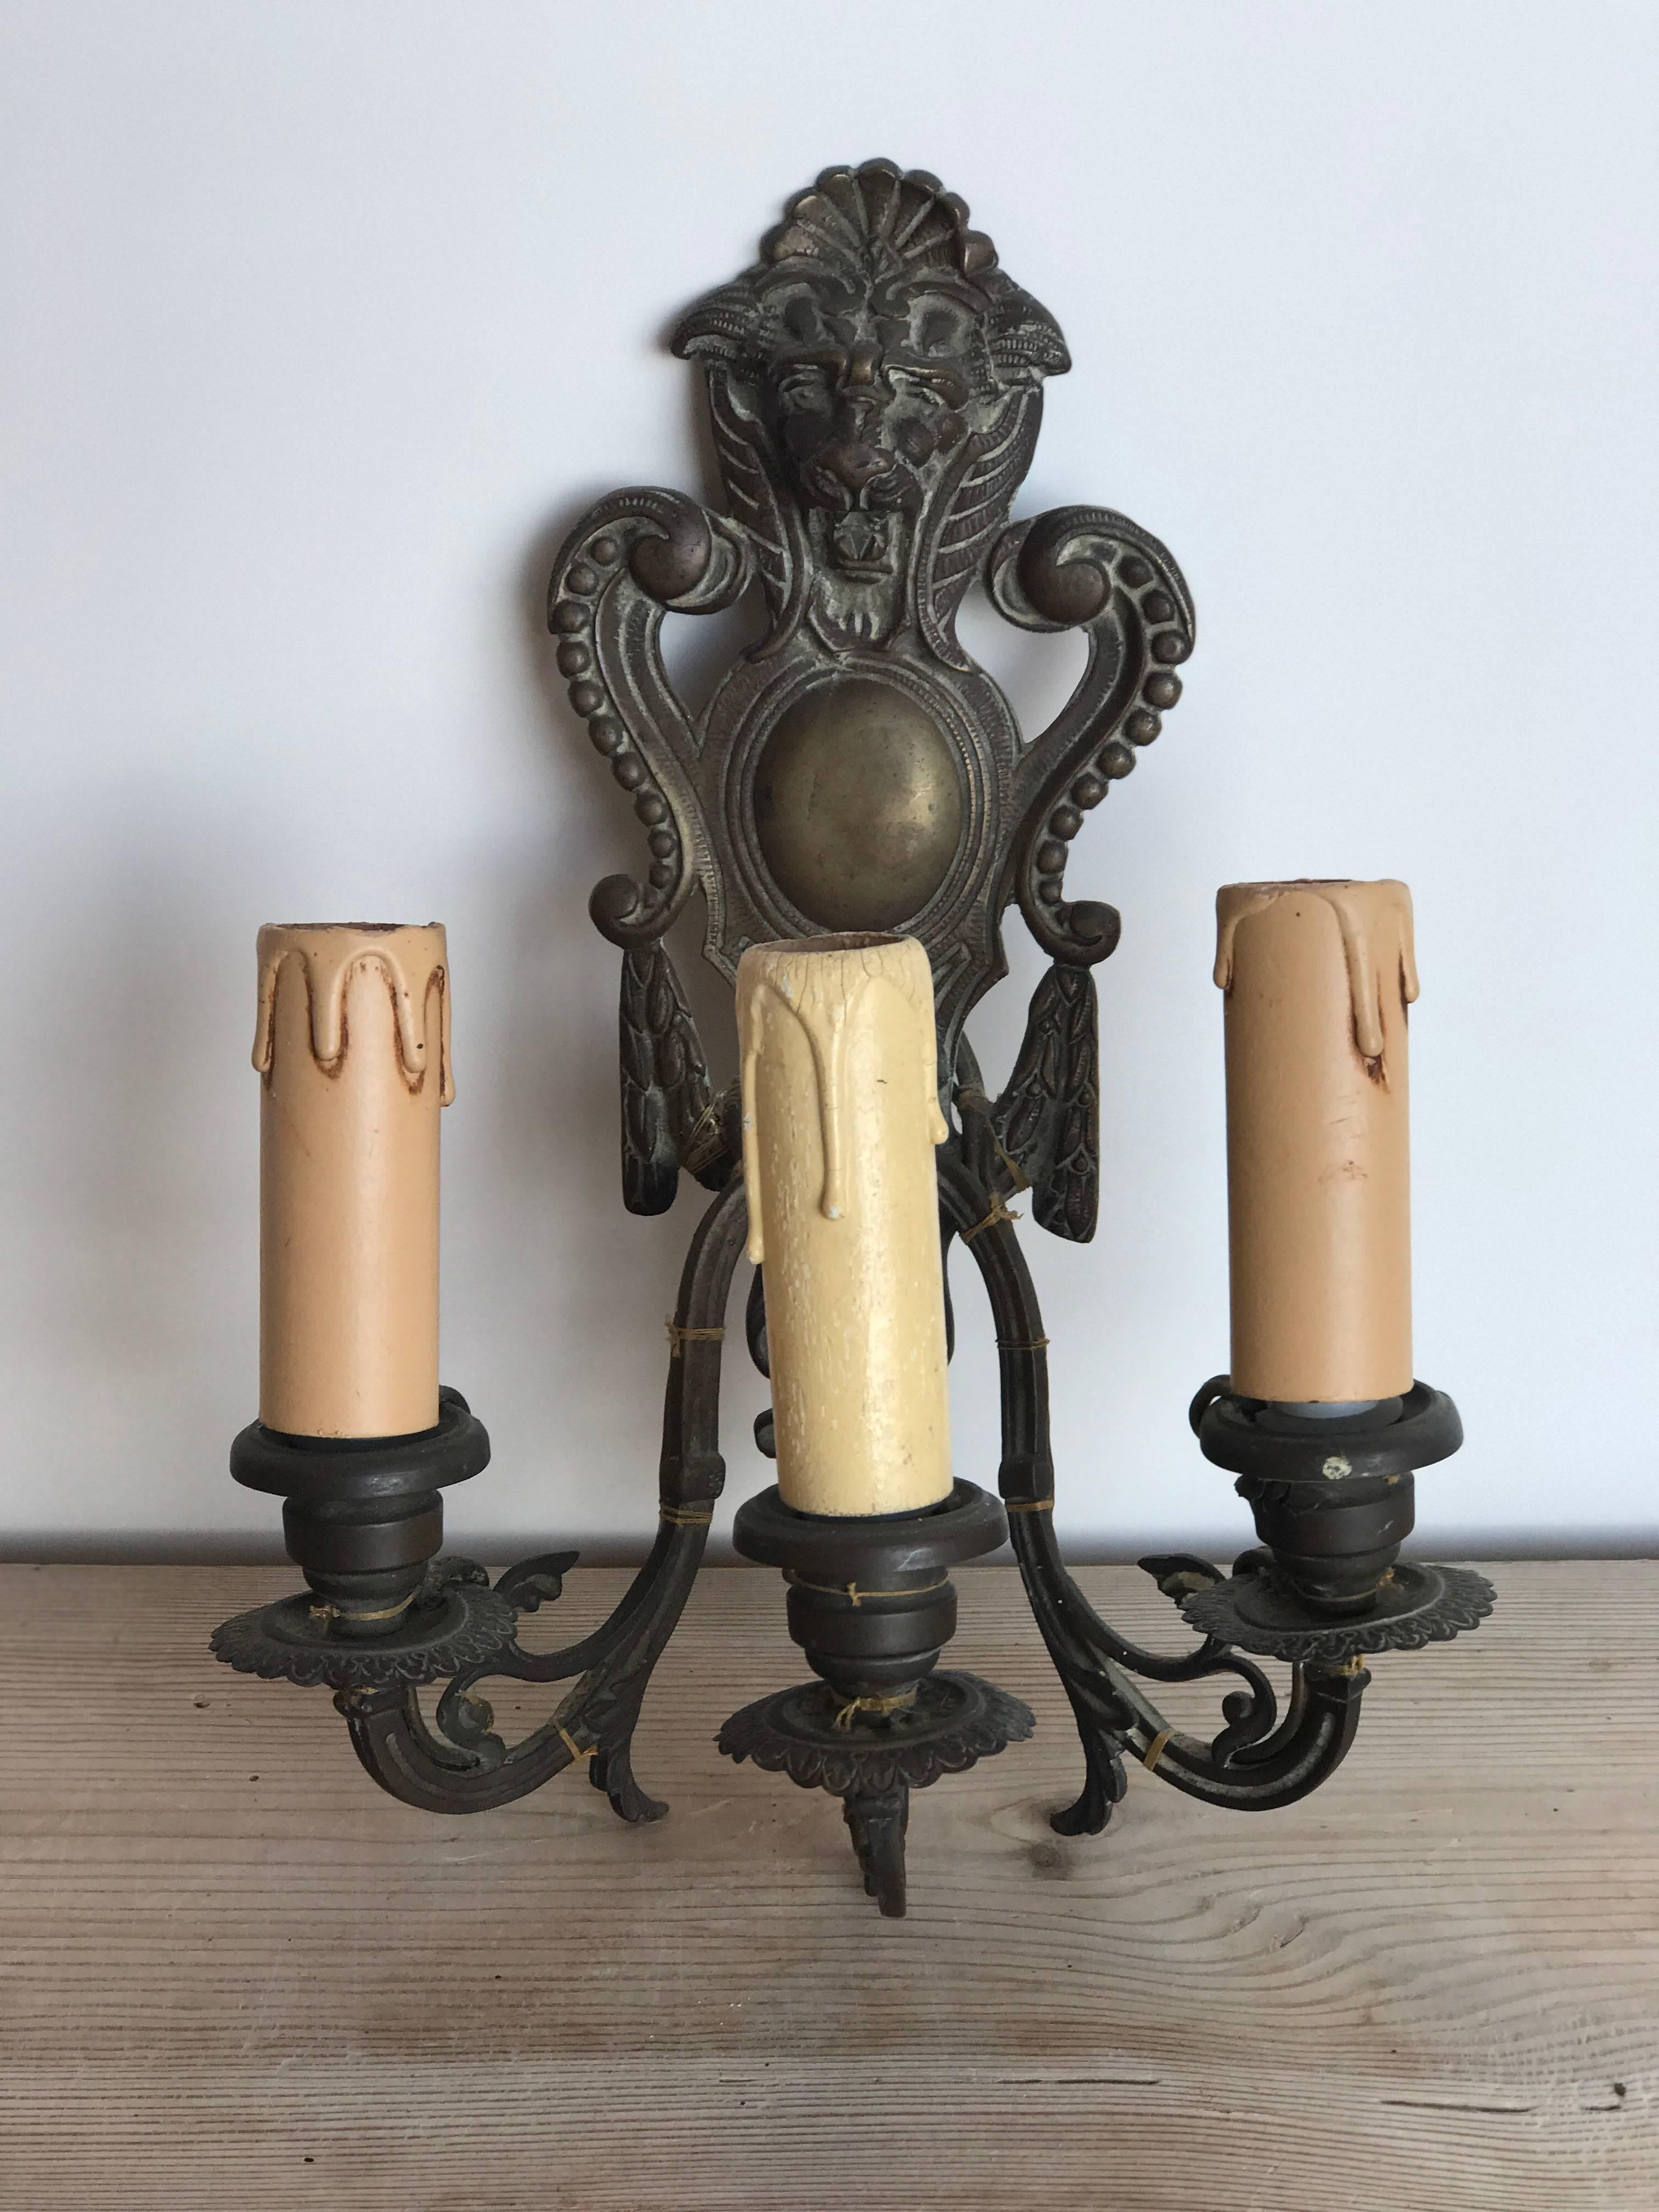 19th century French three-arm bronze sconces with lion heads.